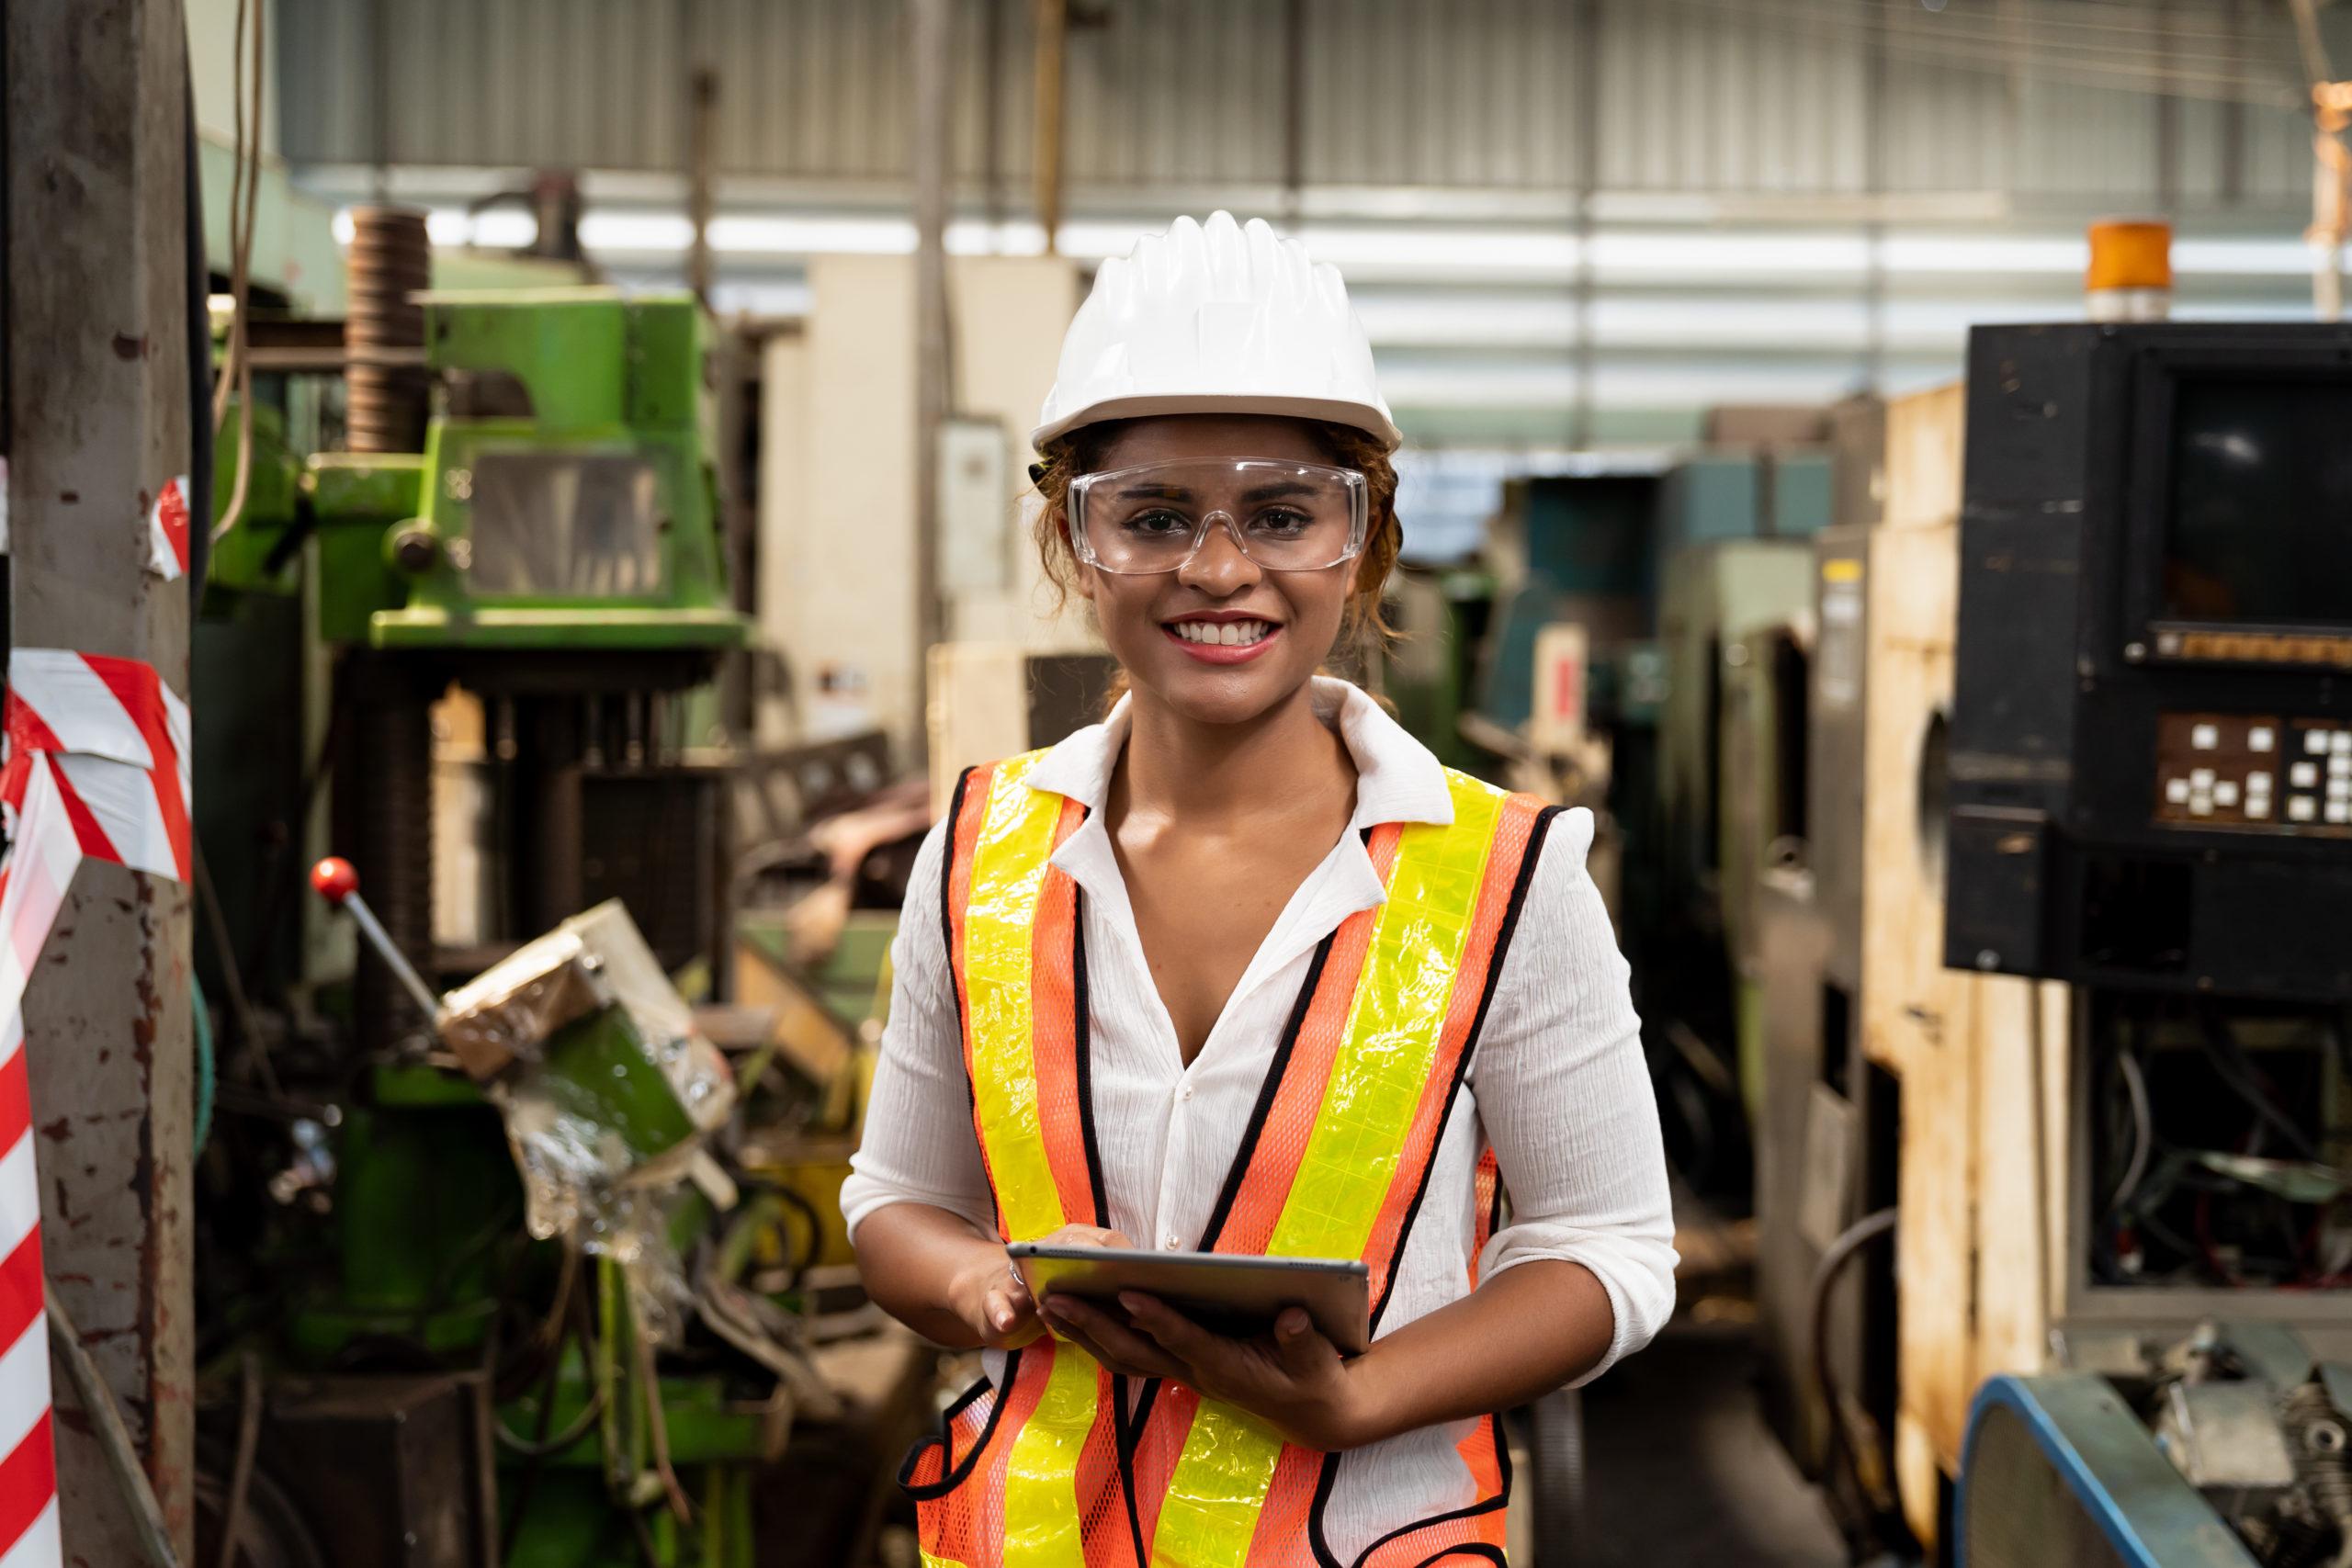 Woman in hardhat in manufacturing facility